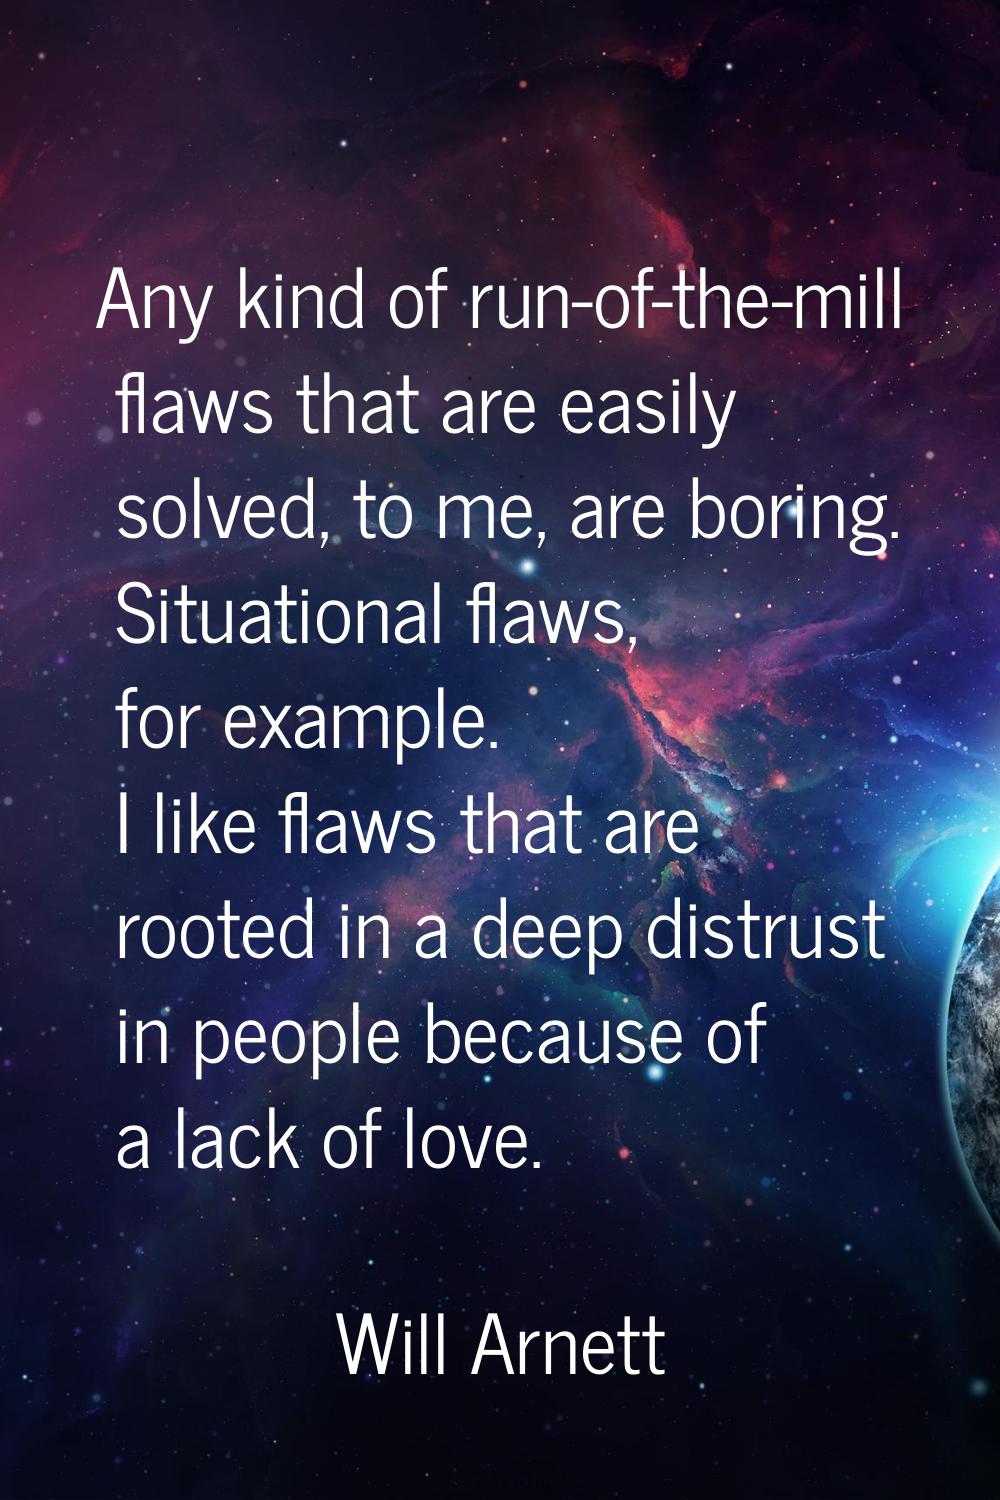 Any kind of run-of-the-mill flaws that are easily solved, to me, are boring. Situational flaws, for